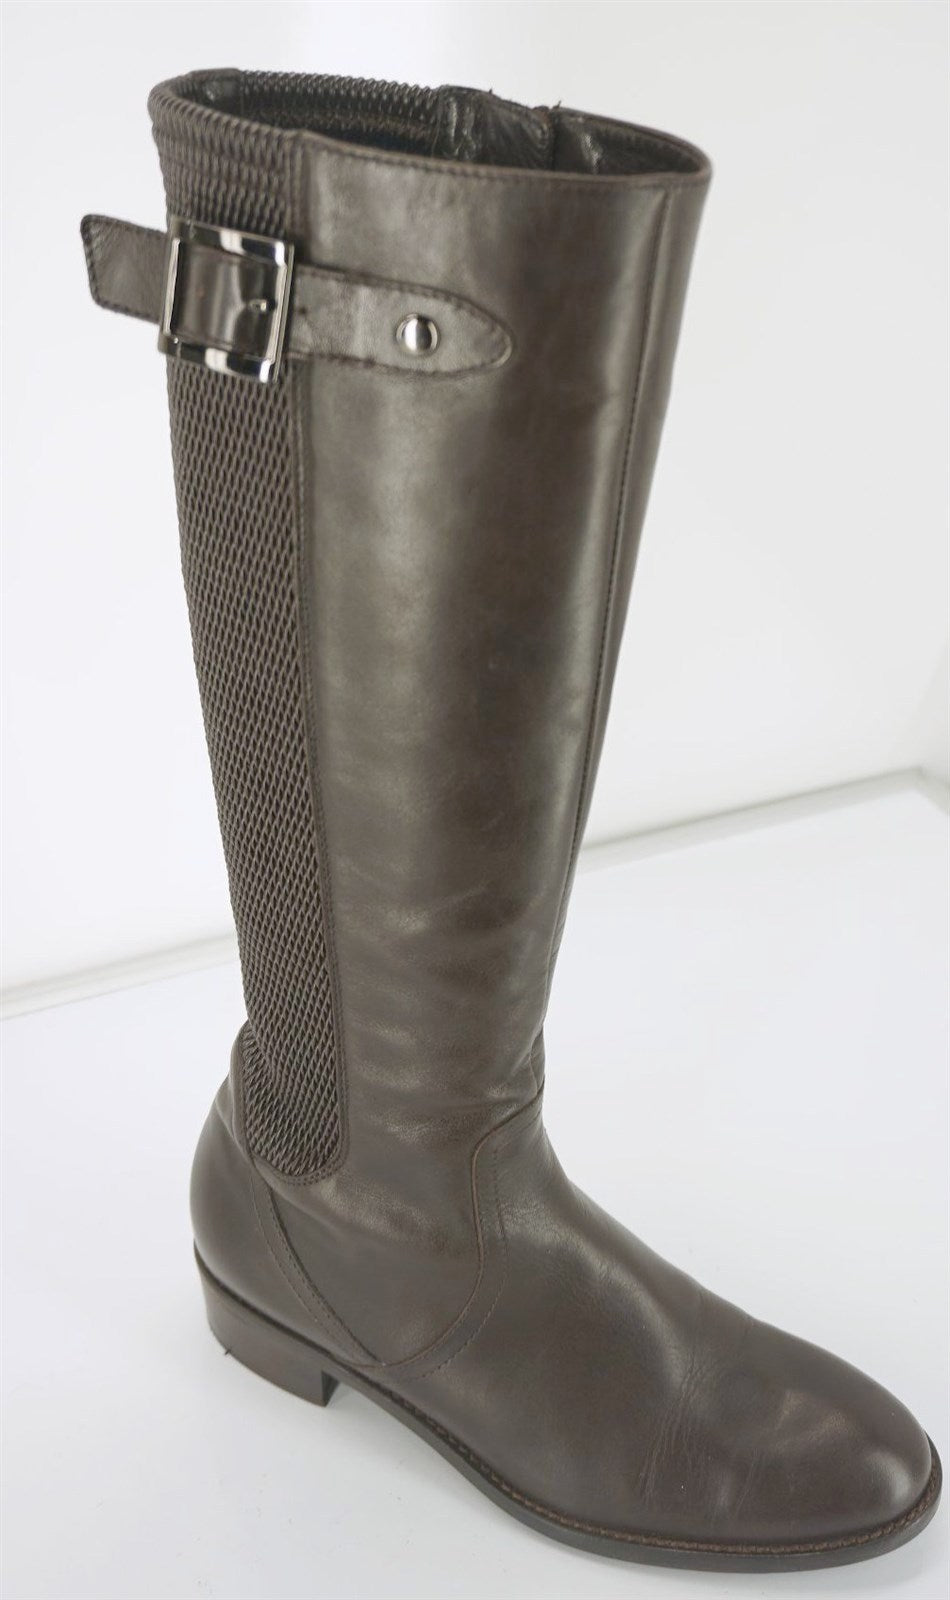 Aquatalia by Marvin K Brown Leather Omni Riding Boots Size 6.5 Weatherproof $550